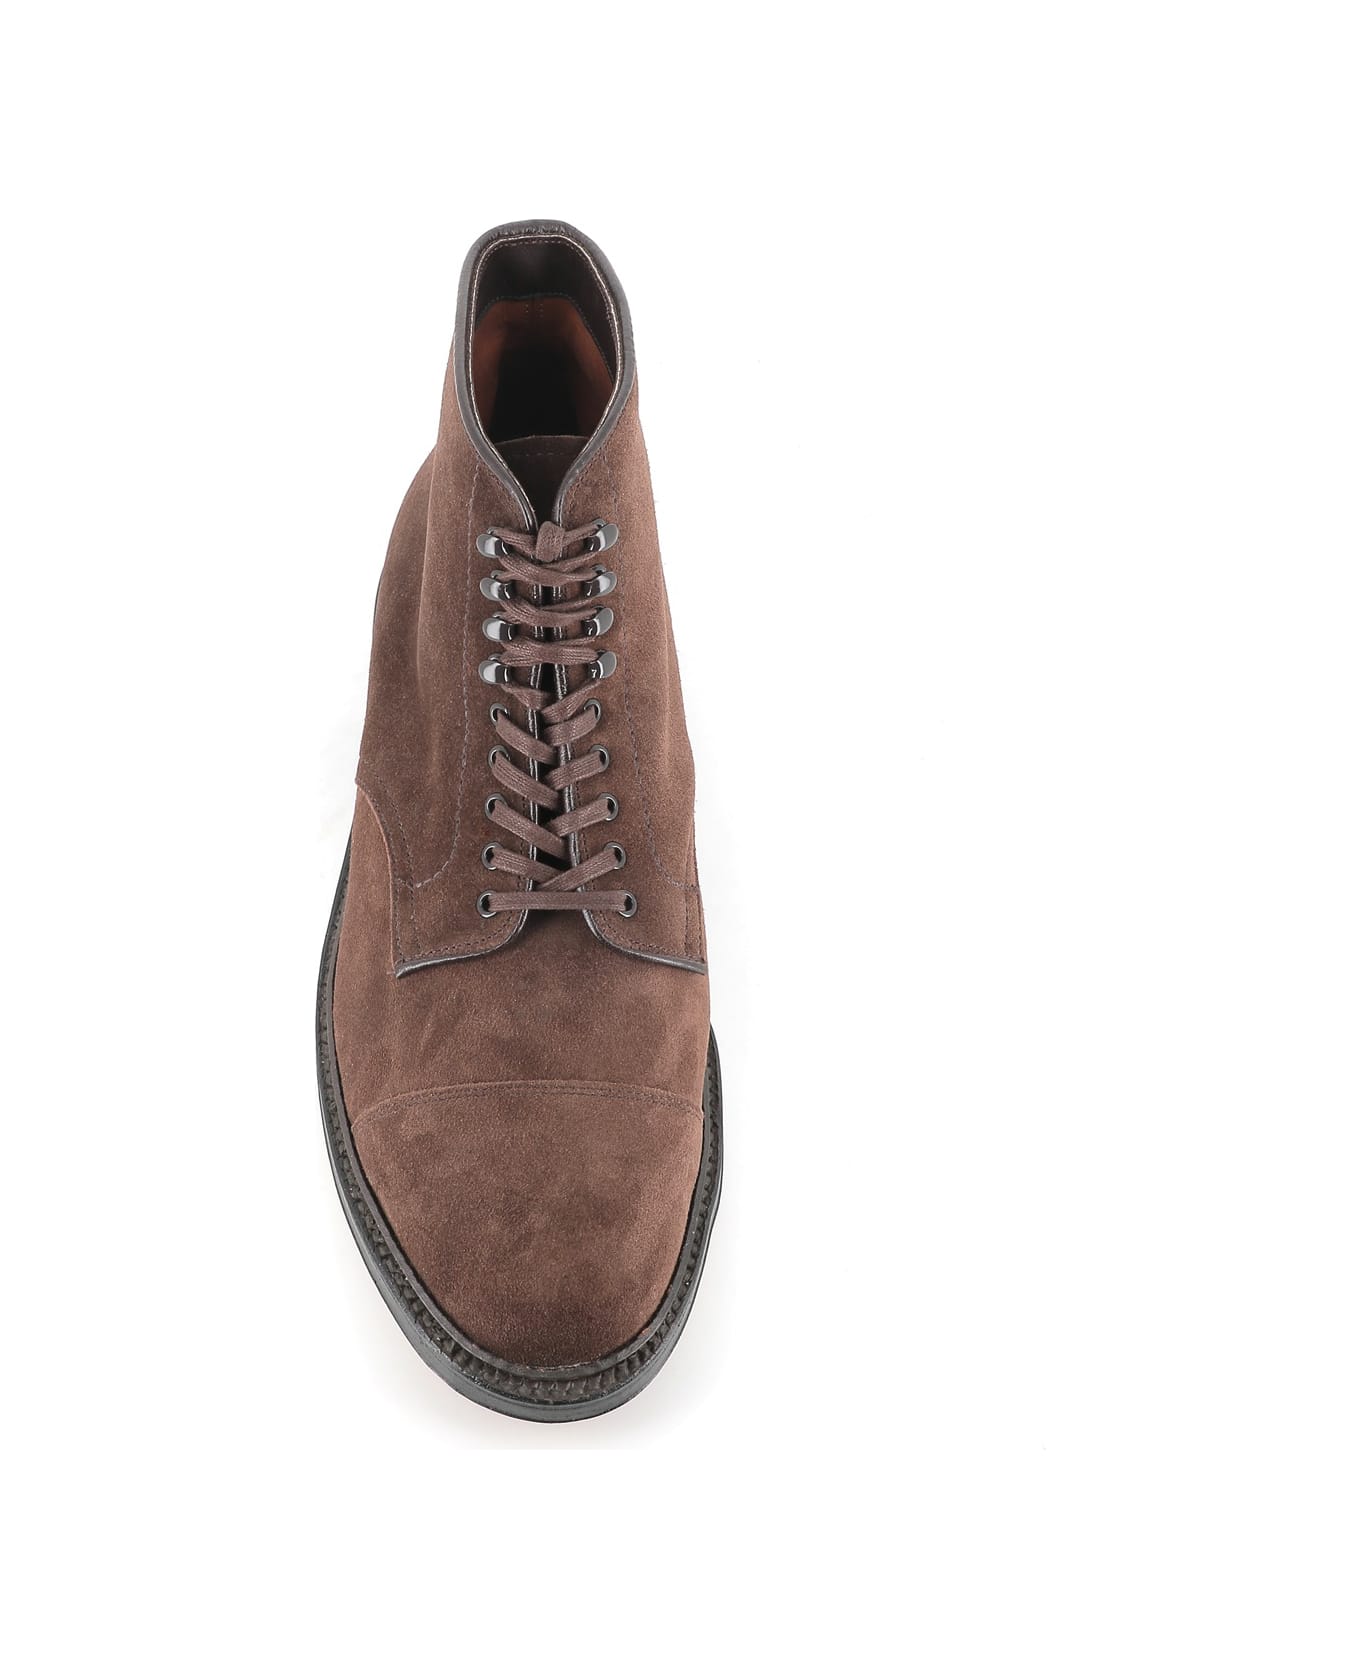 Alden Lace-up Boot 4081 Hy - Brown ブーツ